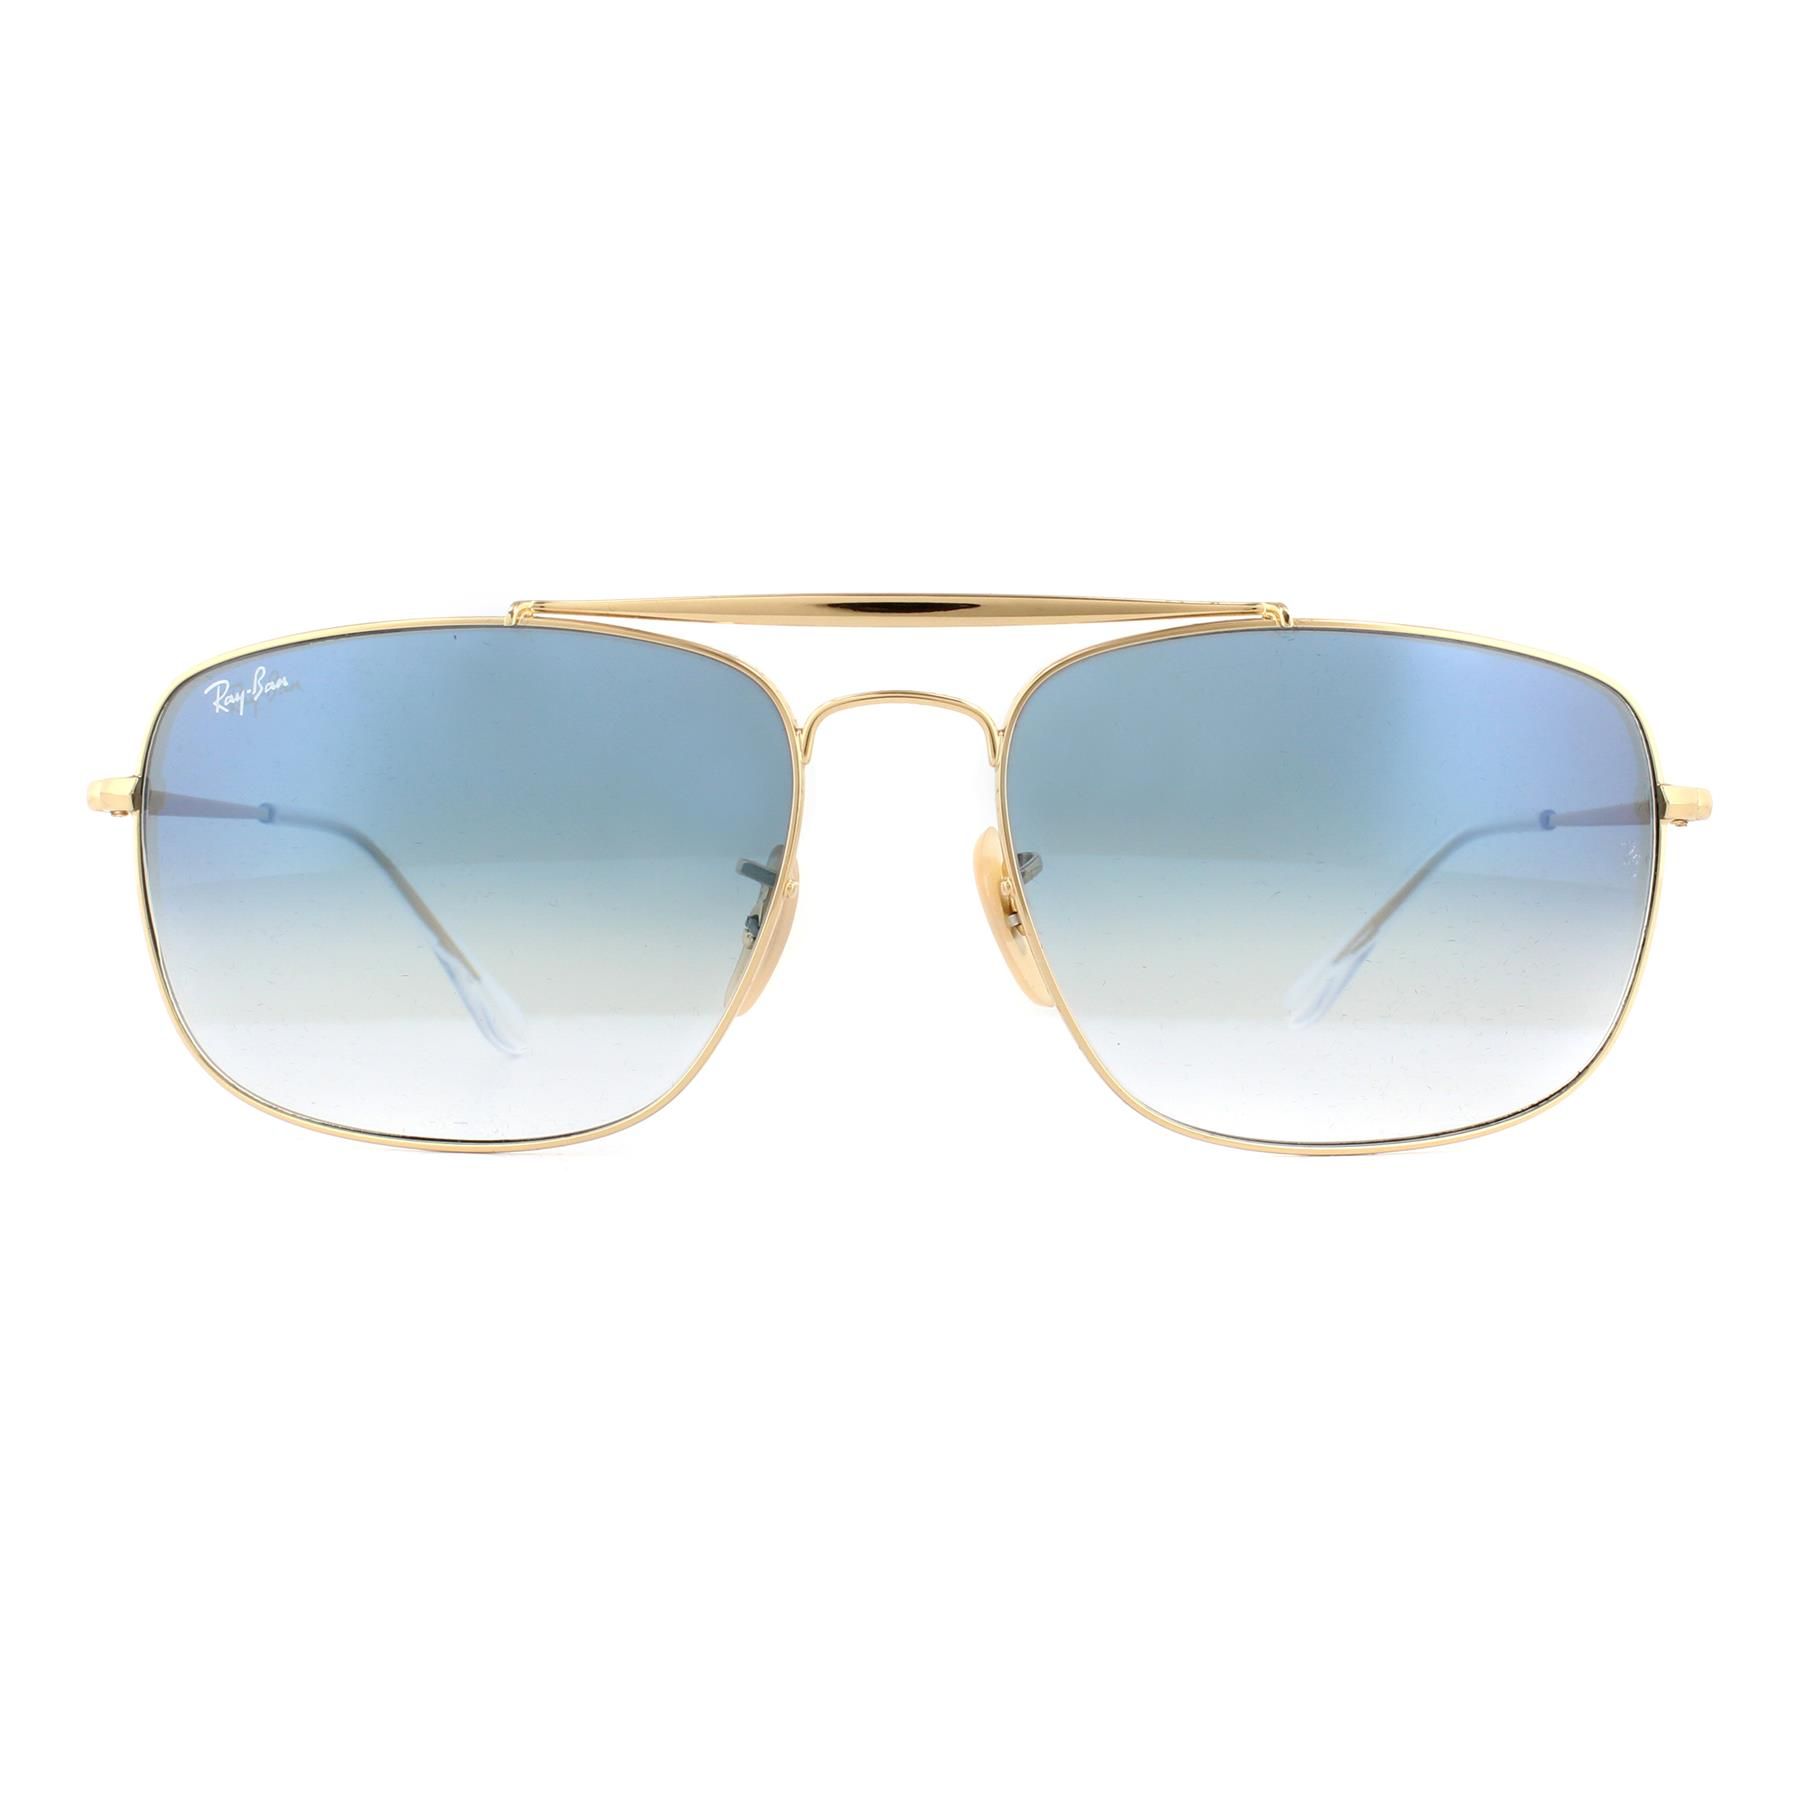 Ray-Ban Sunglasses The Colonel RB3560 001/3F Gold Blue Gradient are a fantastic addition to the aviator collection with this squared off pilot style that features a flat front top brow bar with frontal clips and an otherwise classic look.